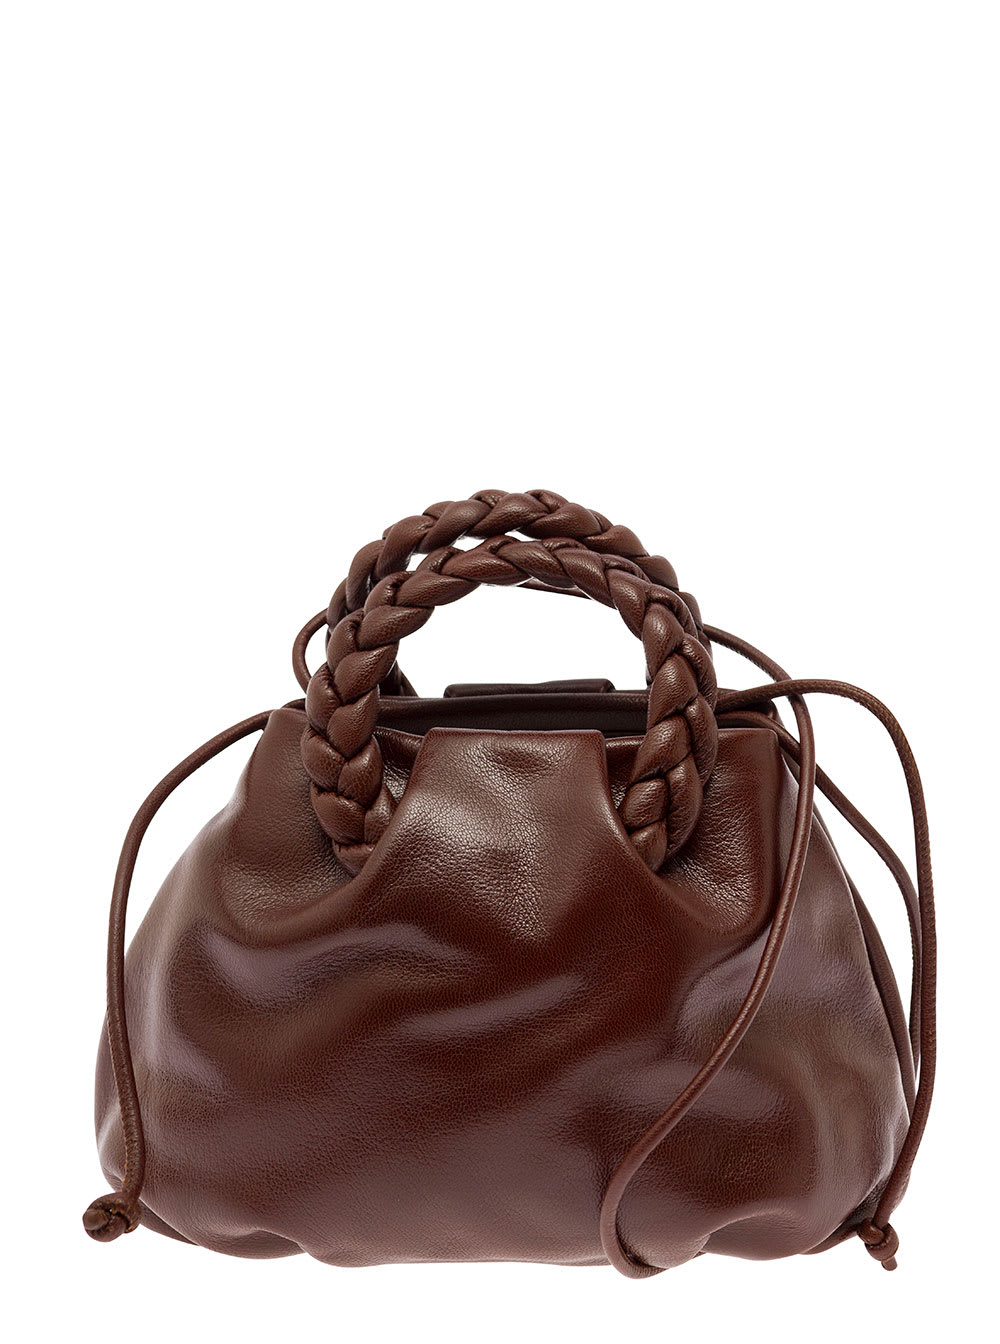 bombon M Brown Handbag With Braided Handles In Shiny Leather Woman